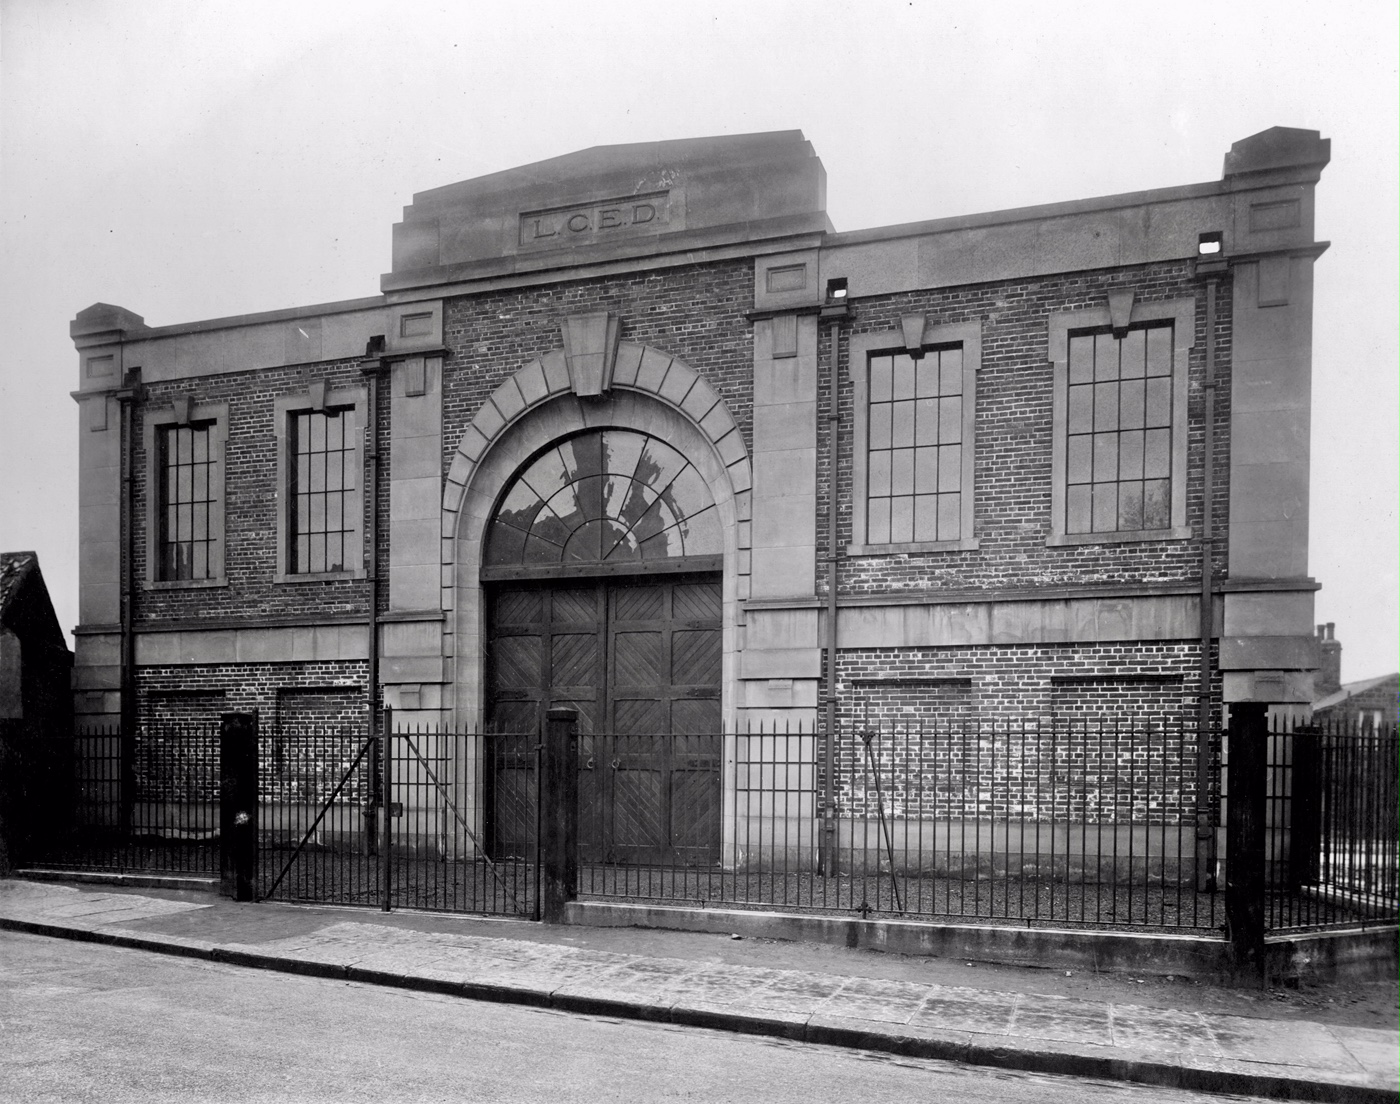 Electricity Sub-Station, Moor Road, 1932